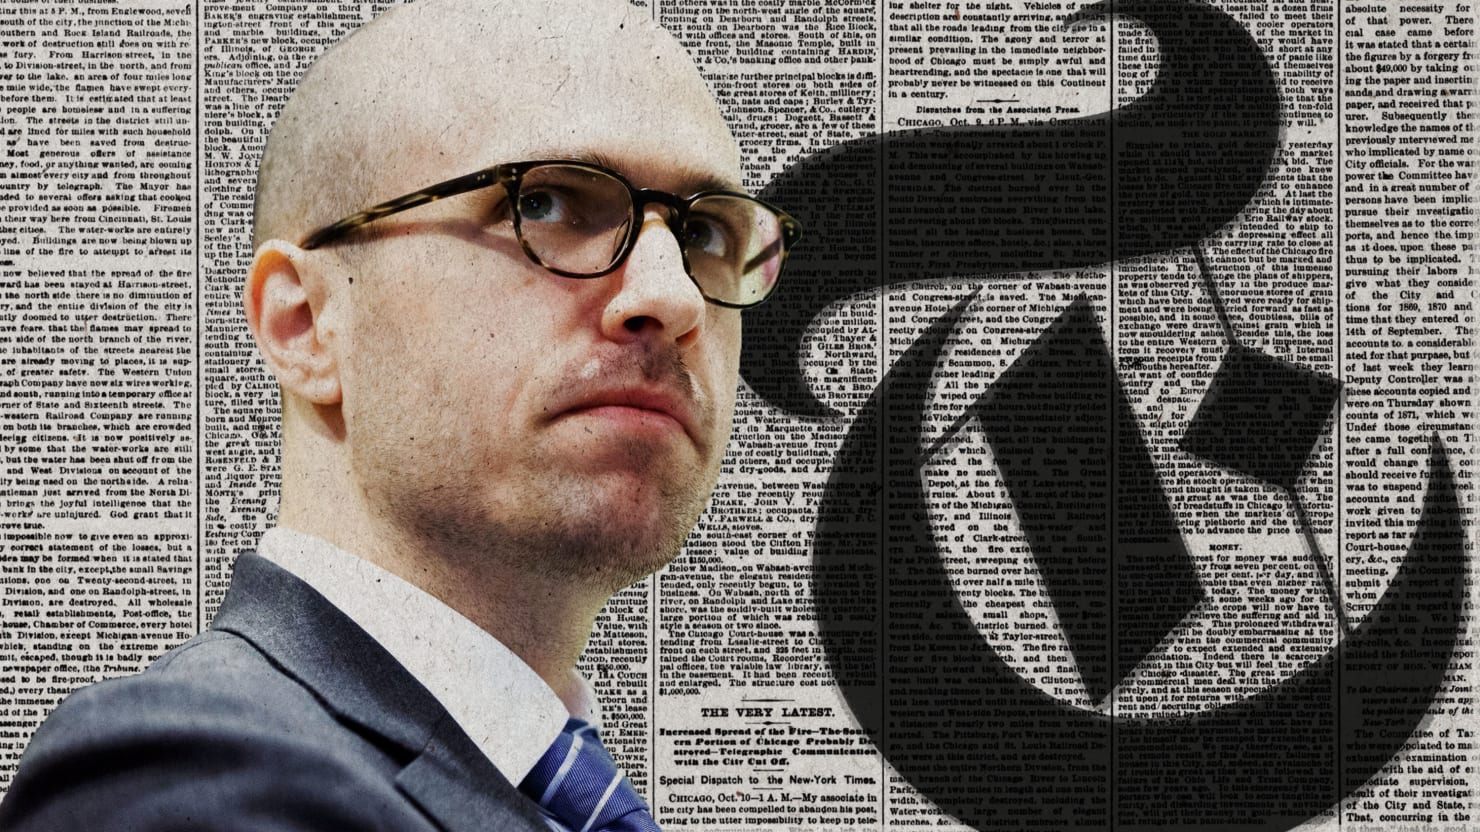 New York Times Publisher A.G. Sulzberger Laments 'Loss of a Talent' Like  James Bennet